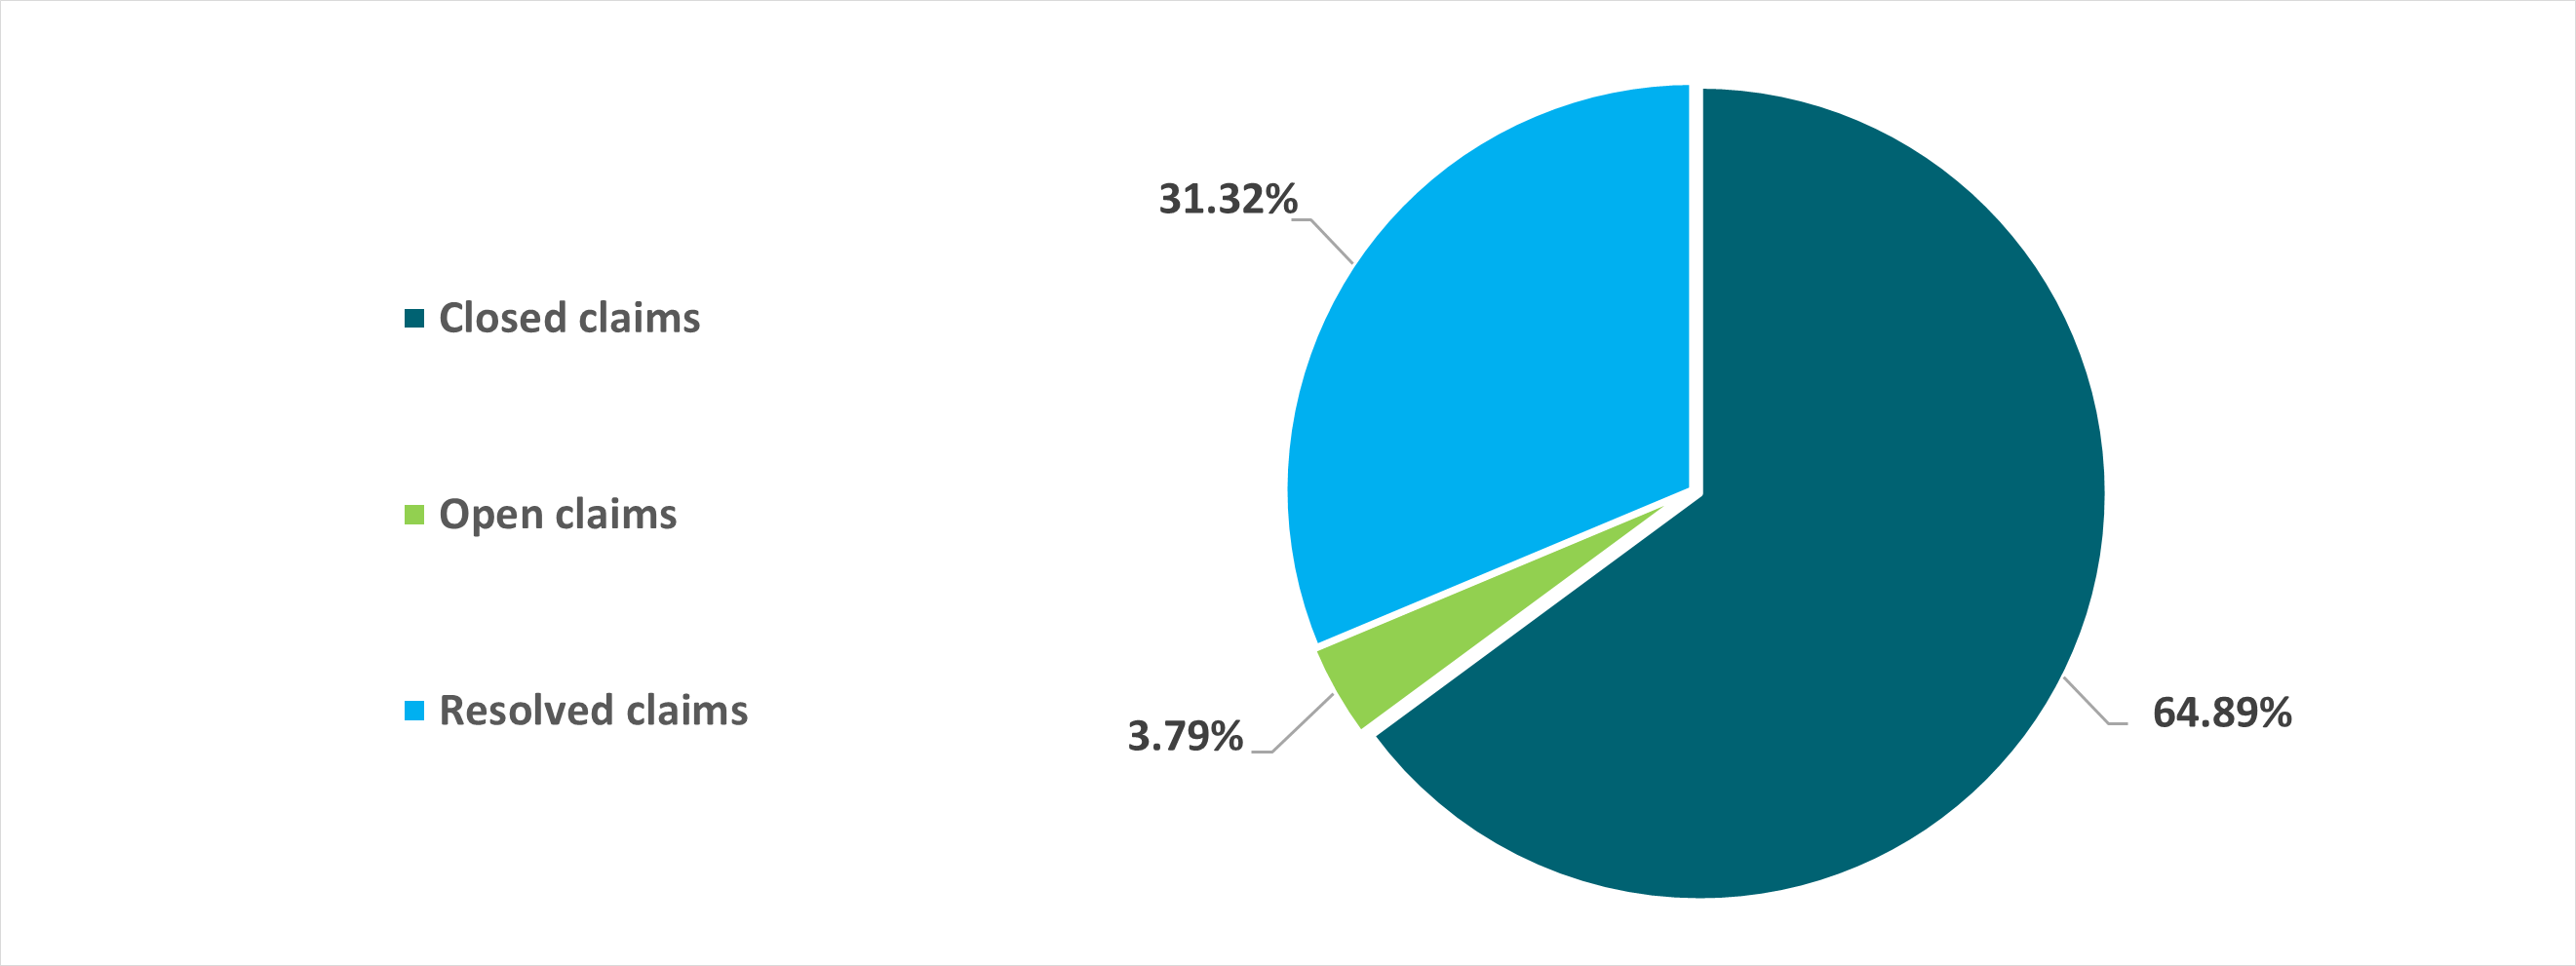 Pie chart displaying the data listed below.